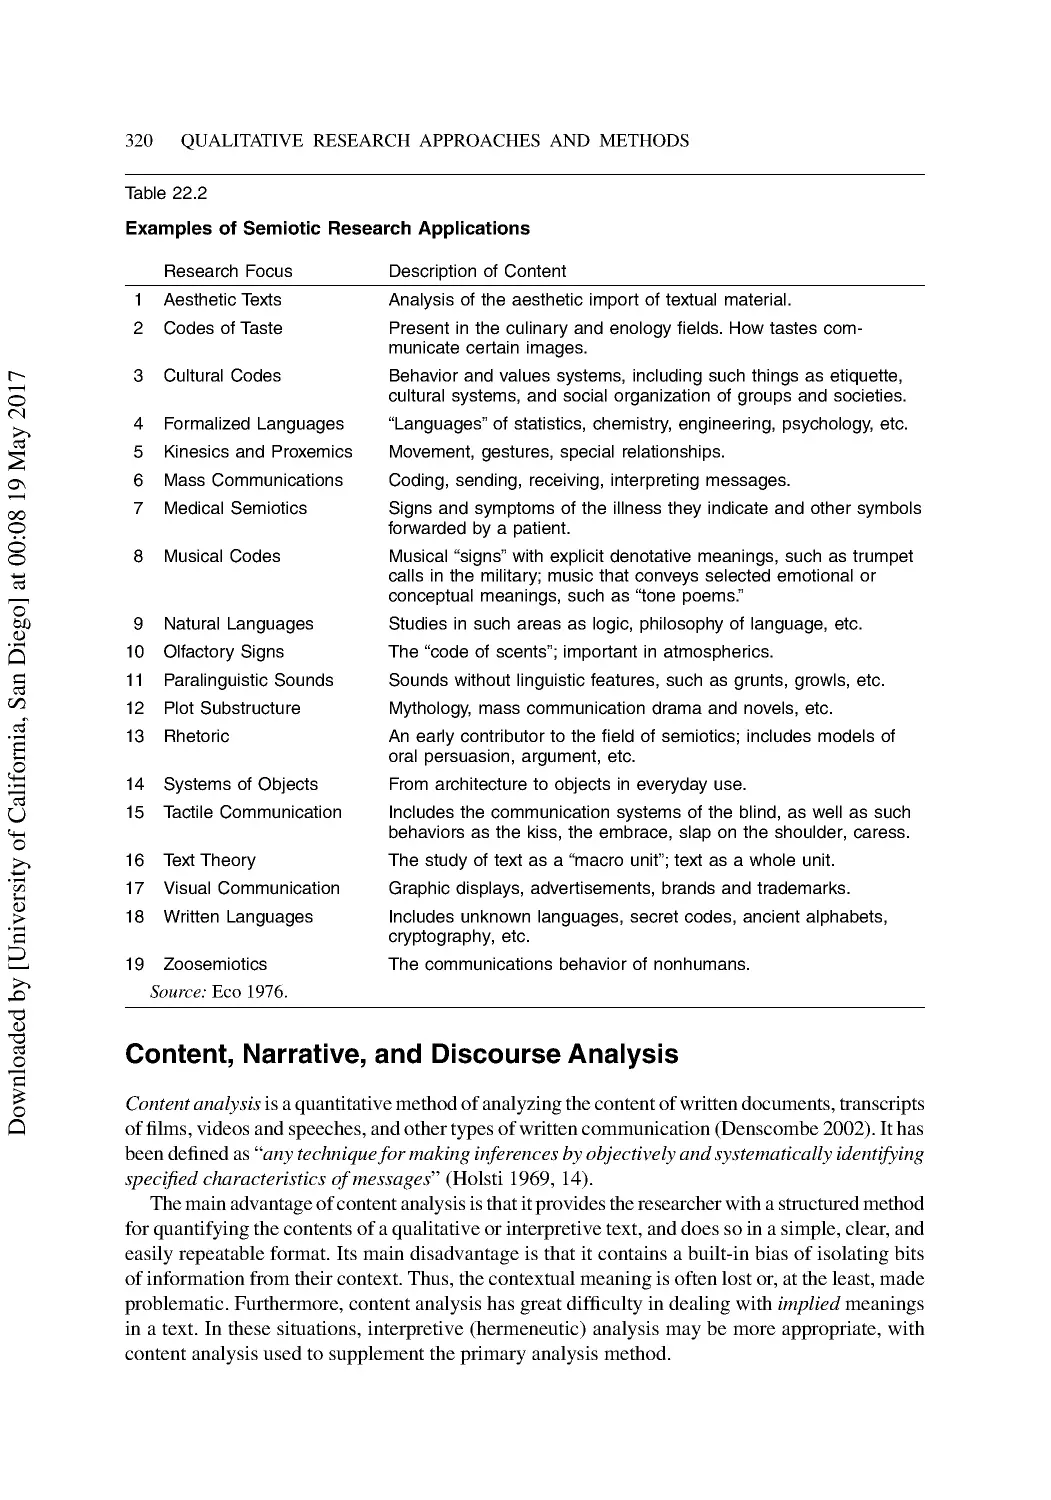 Content, Narrative, and Discourse Analysis